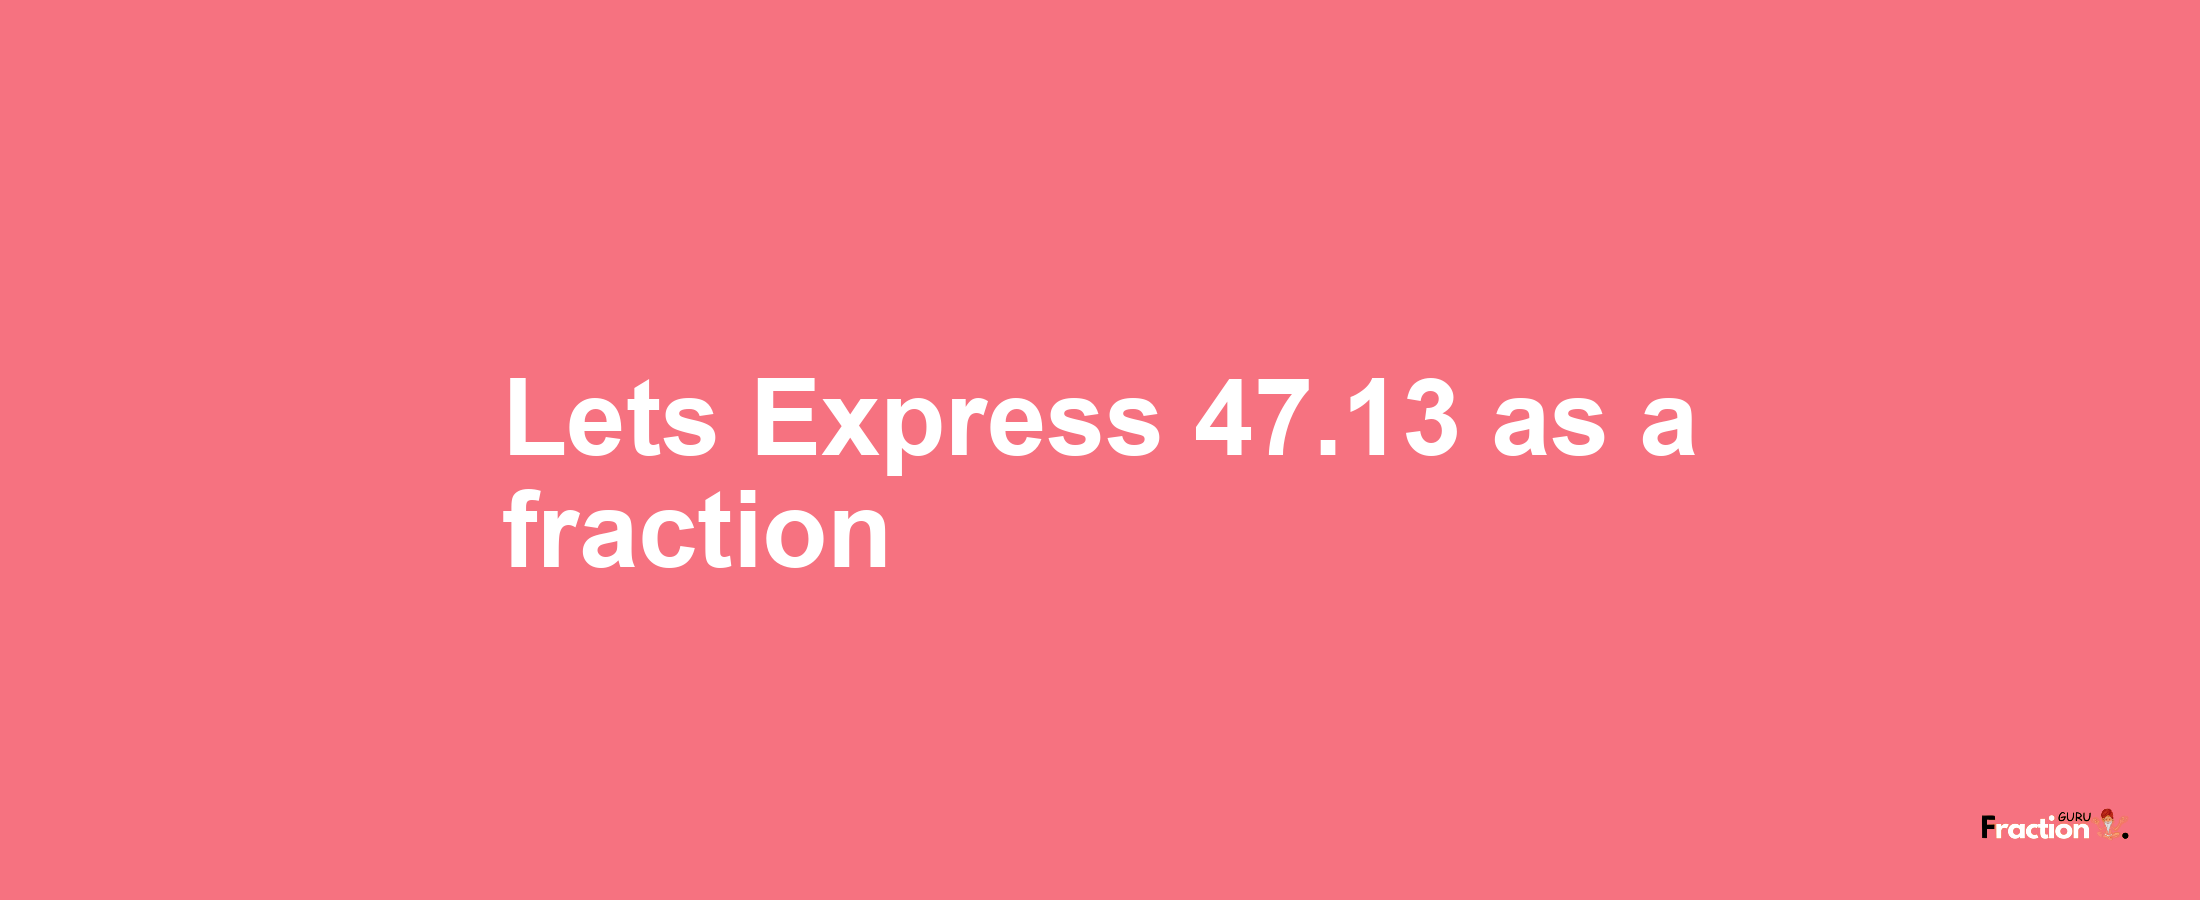 Lets Express 47.13 as afraction